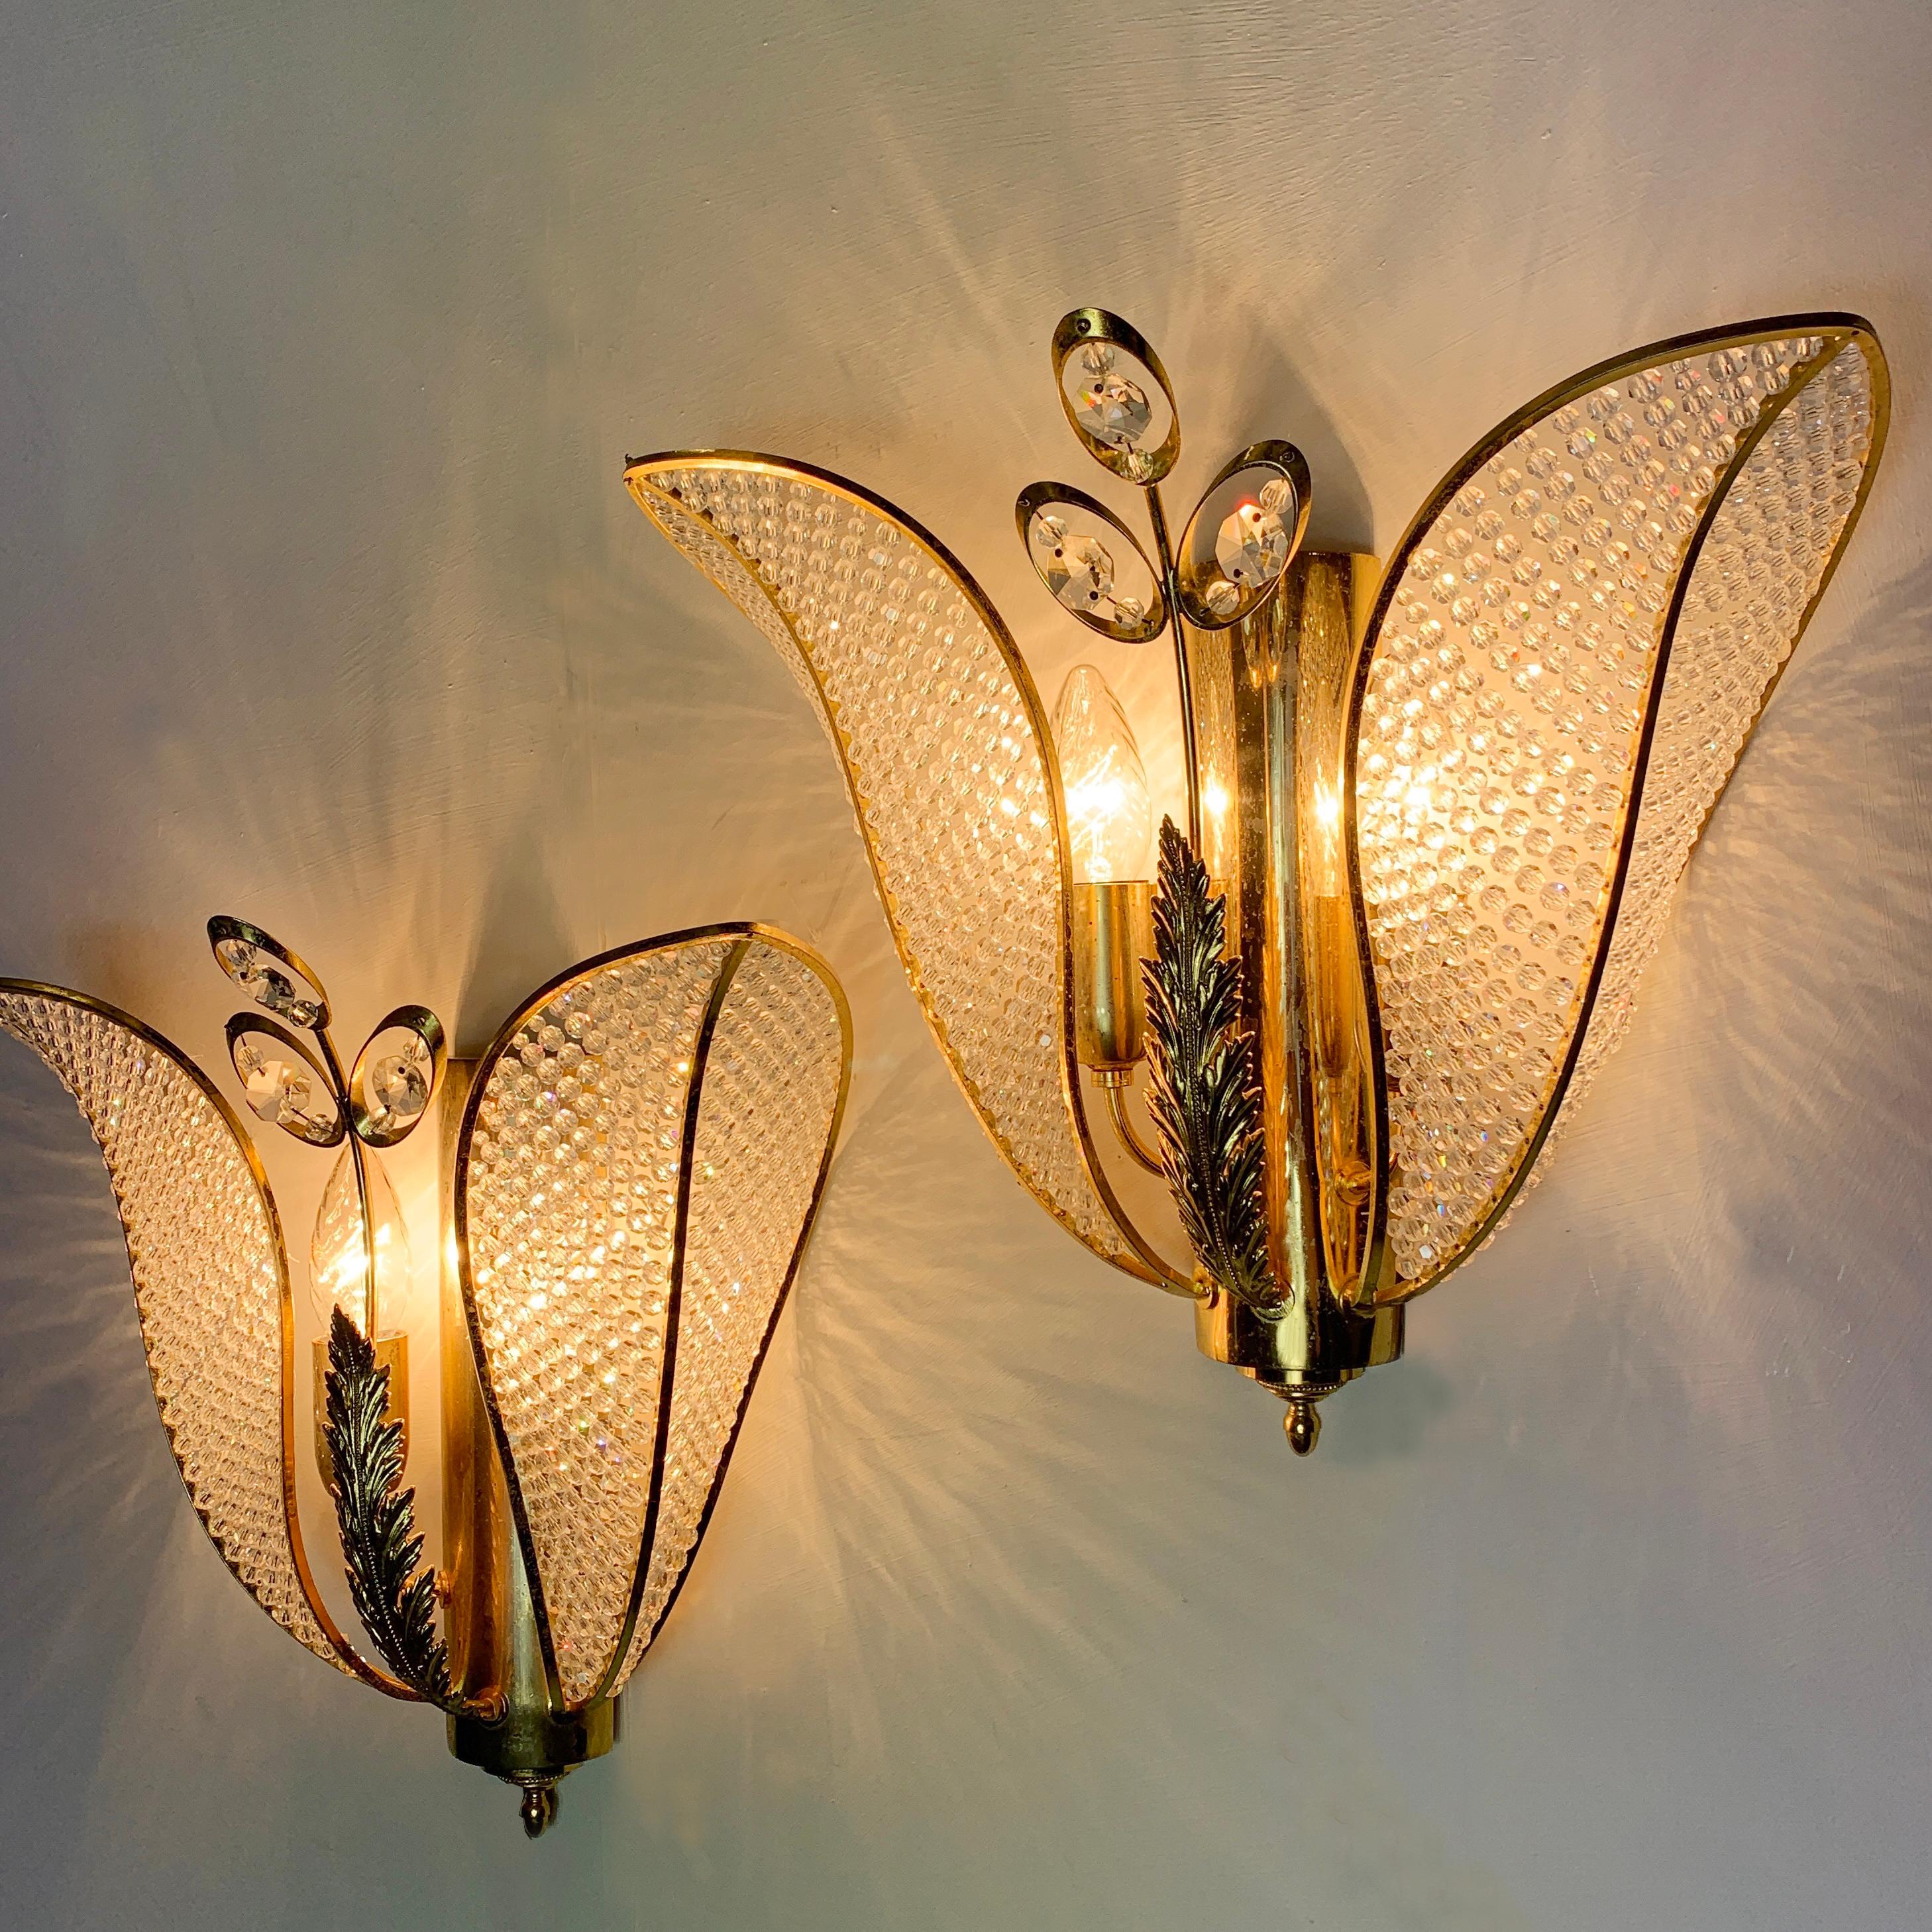 Palwa cut glass crystal tulip wall lights, circa 1970s, Germany.
Measures: 32cm height, 36cm width, 16cm depth
PAT tested
Each light takes 2 bulbs, small bayonet fitting
Price is for the pair, 2 wall lights

The light is wired and in full working